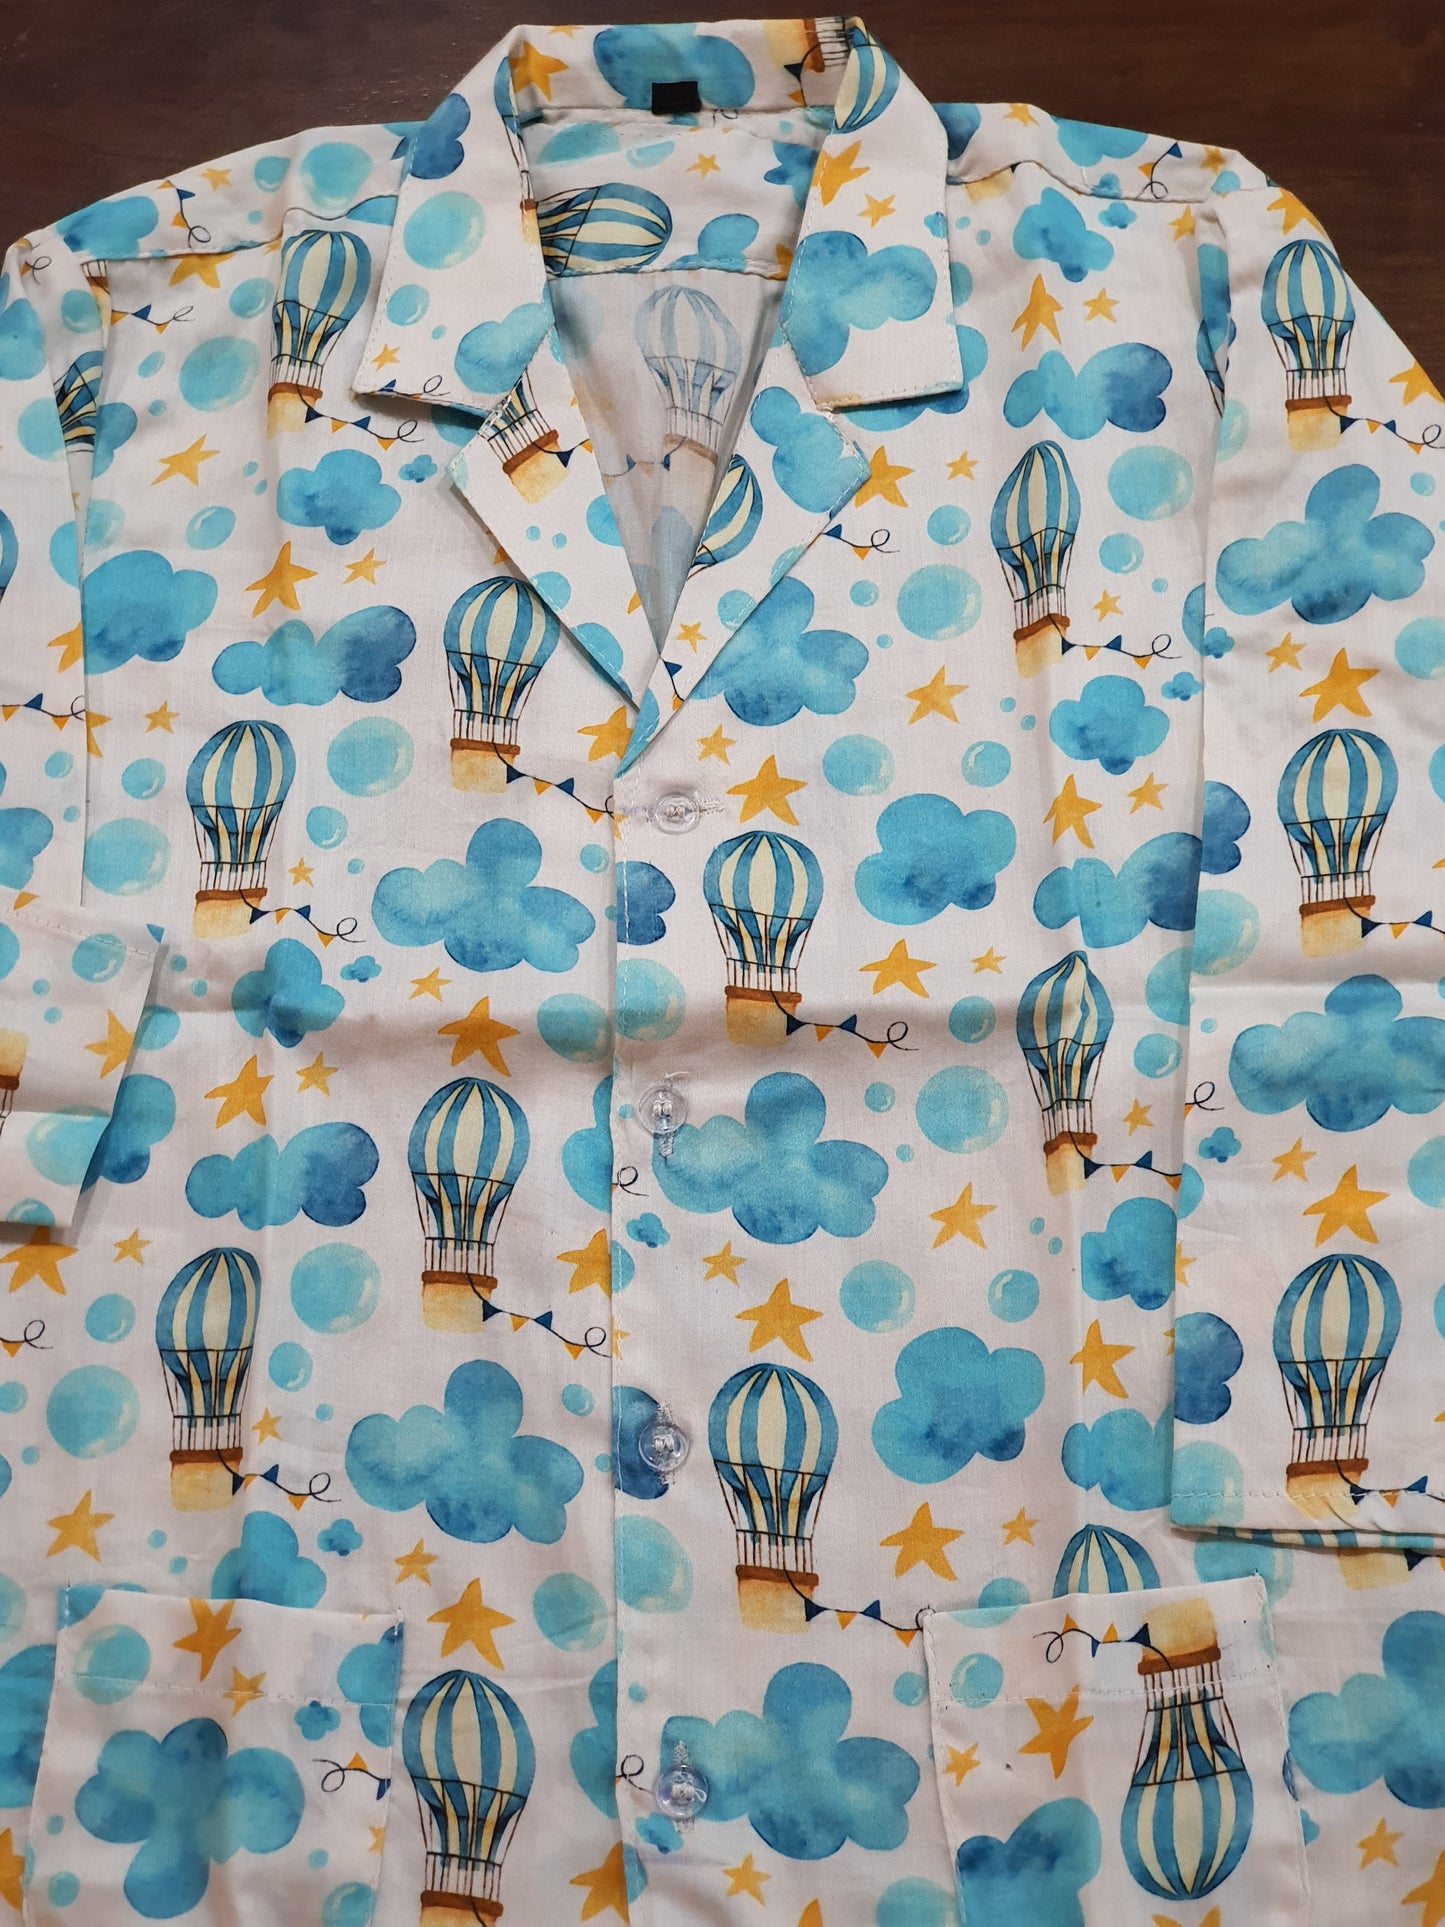 Super Soft Cotton Night Suit | Clouds & Air Balloon Print